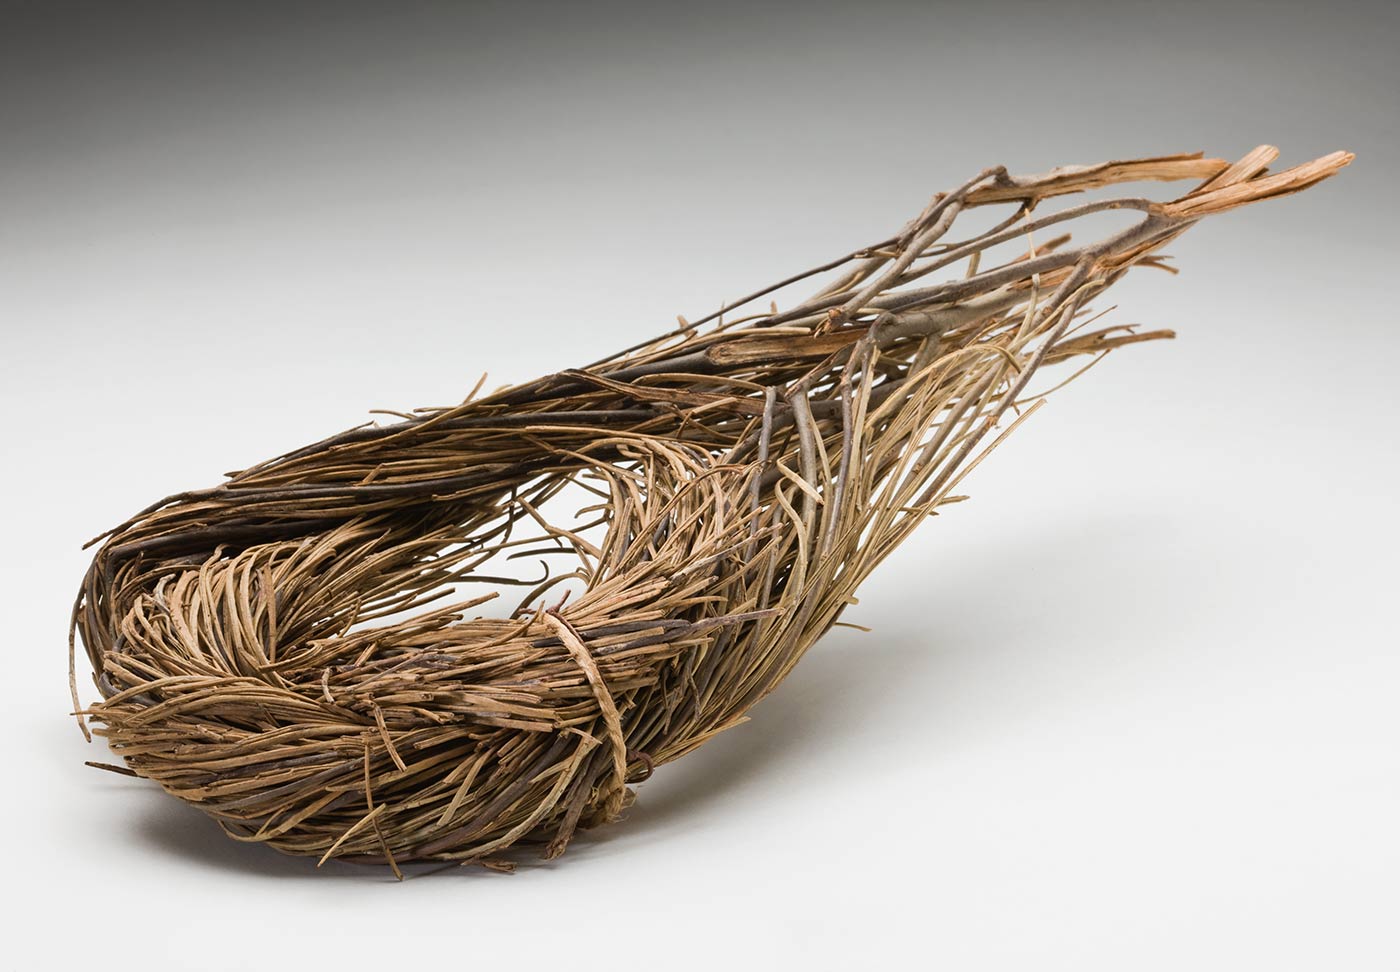 Head pad from the South Australian Museum Collection Description	An undyed grass and twig tear drop like shaped head pad. Two bunches of twigs and grasses have been twisted and folded over to form the tear drop like shape with their ends crossed and protruding. Two tags are attached with string. - click to view larger image